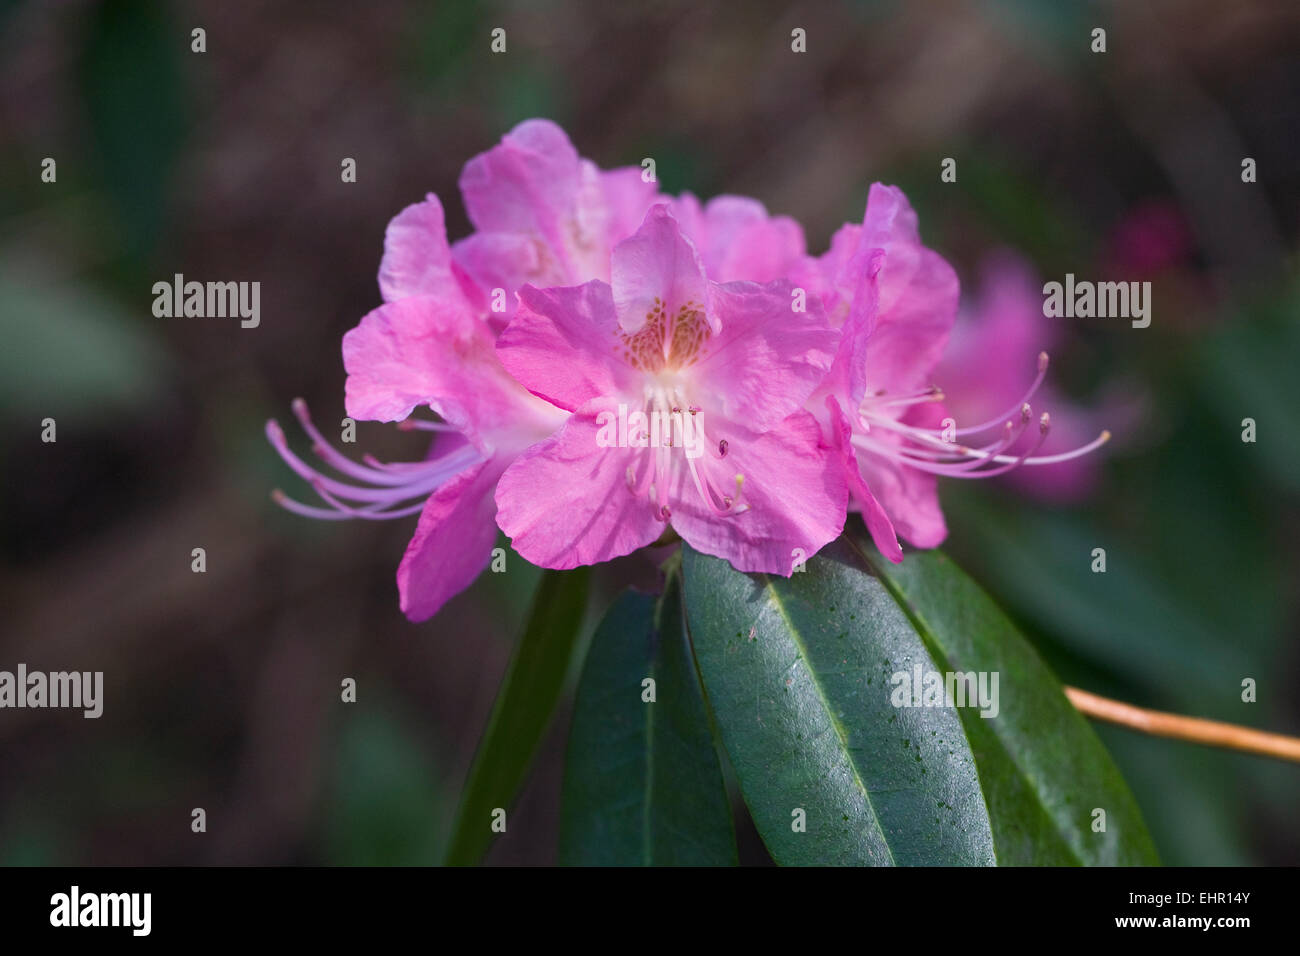 Rhododendron 'Airy Fairy' flowers. Stock Photo